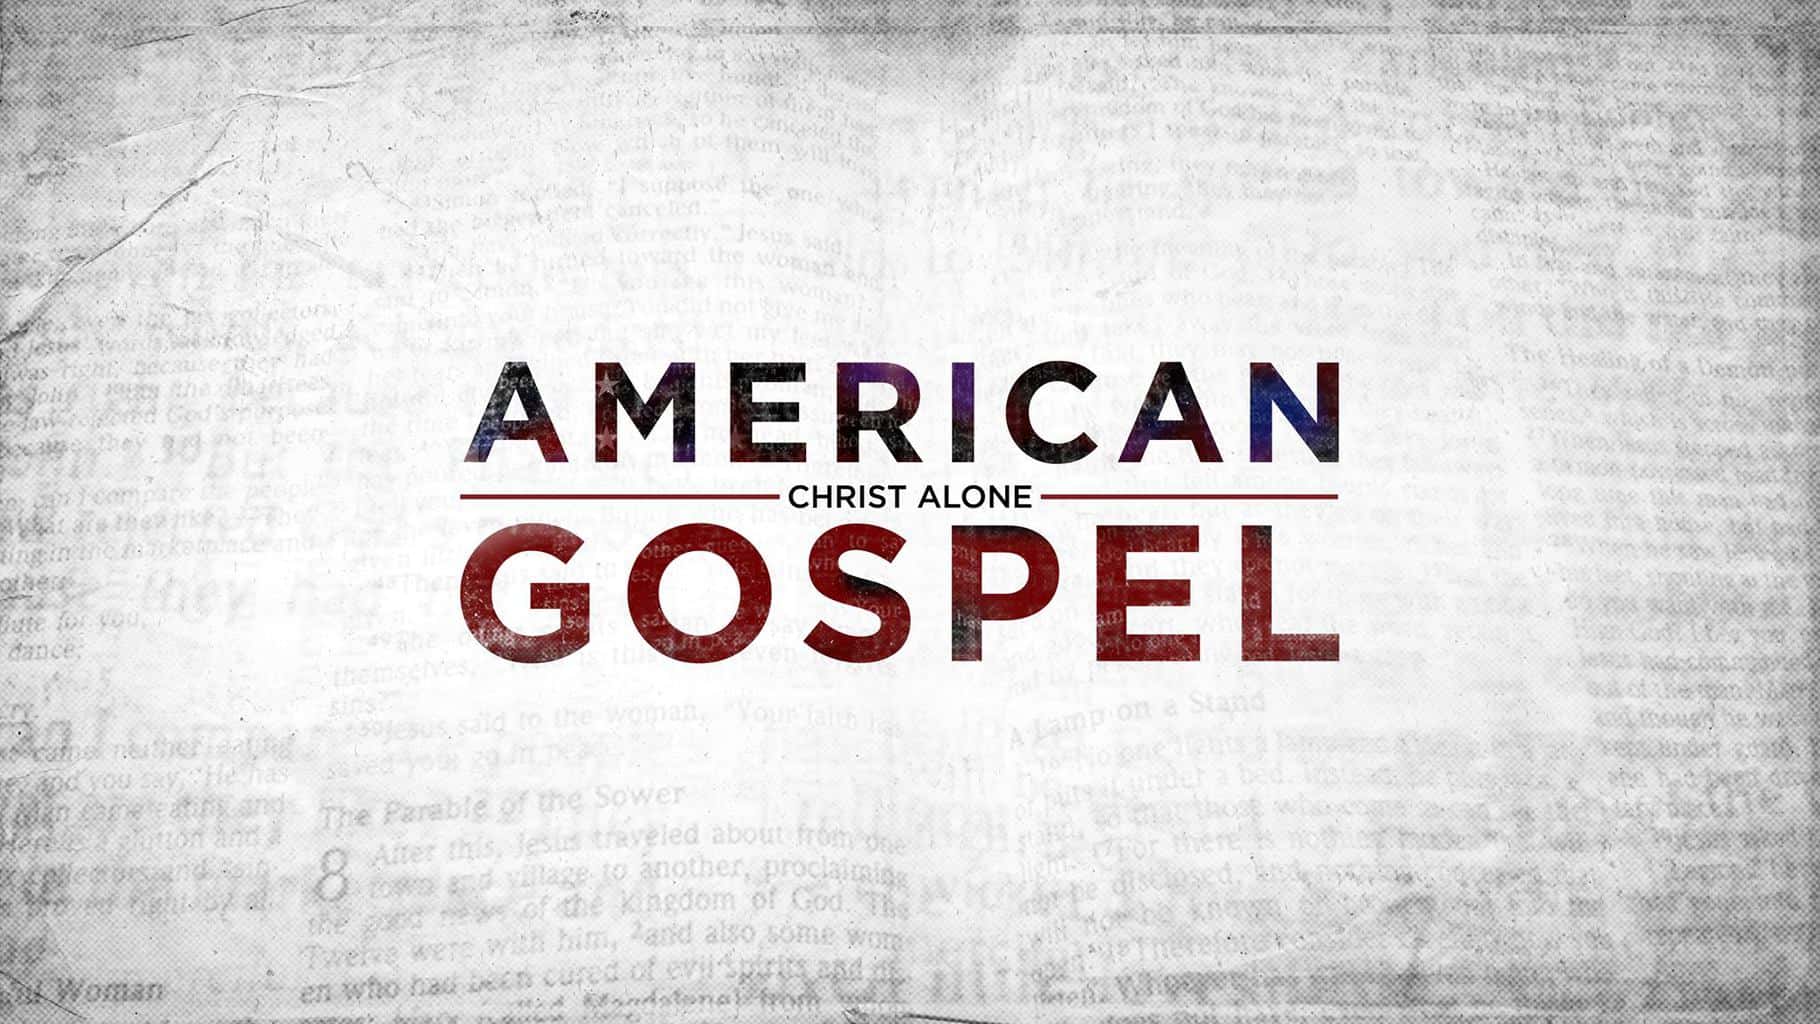 American Gospel: Christ Alone Film - About: Is Christianity Christ + the American dream? American Gospel  examines how the prosperity gospel (the Word of Faith movement) has distorted the gospel message, and how this theology is being exported abroad. This feature-length film is the first in a series. 